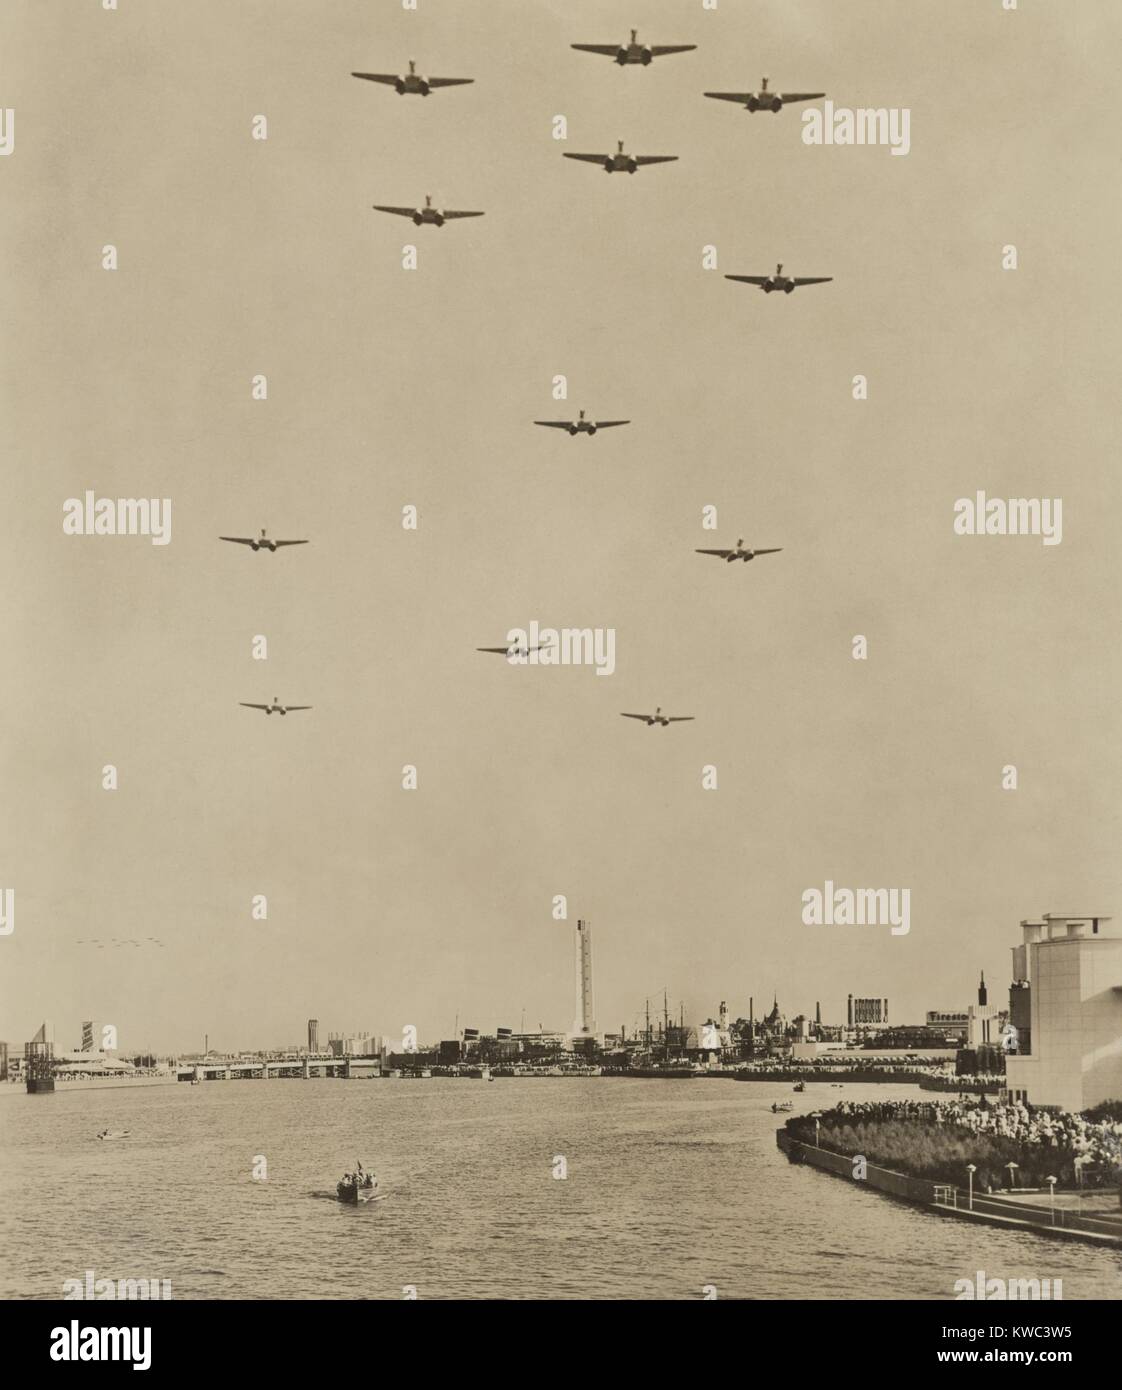 Italian flying boats fly over the Century of Progress exposition in Chicago, July 15, 1933. Led by aviator Italo Balbo, 24 planes completed a transatlantic flight from Rome to Chicago, landing on Lake Michigan near the fairgrounds. (BSLOC 2015 14 194) Stock Photo